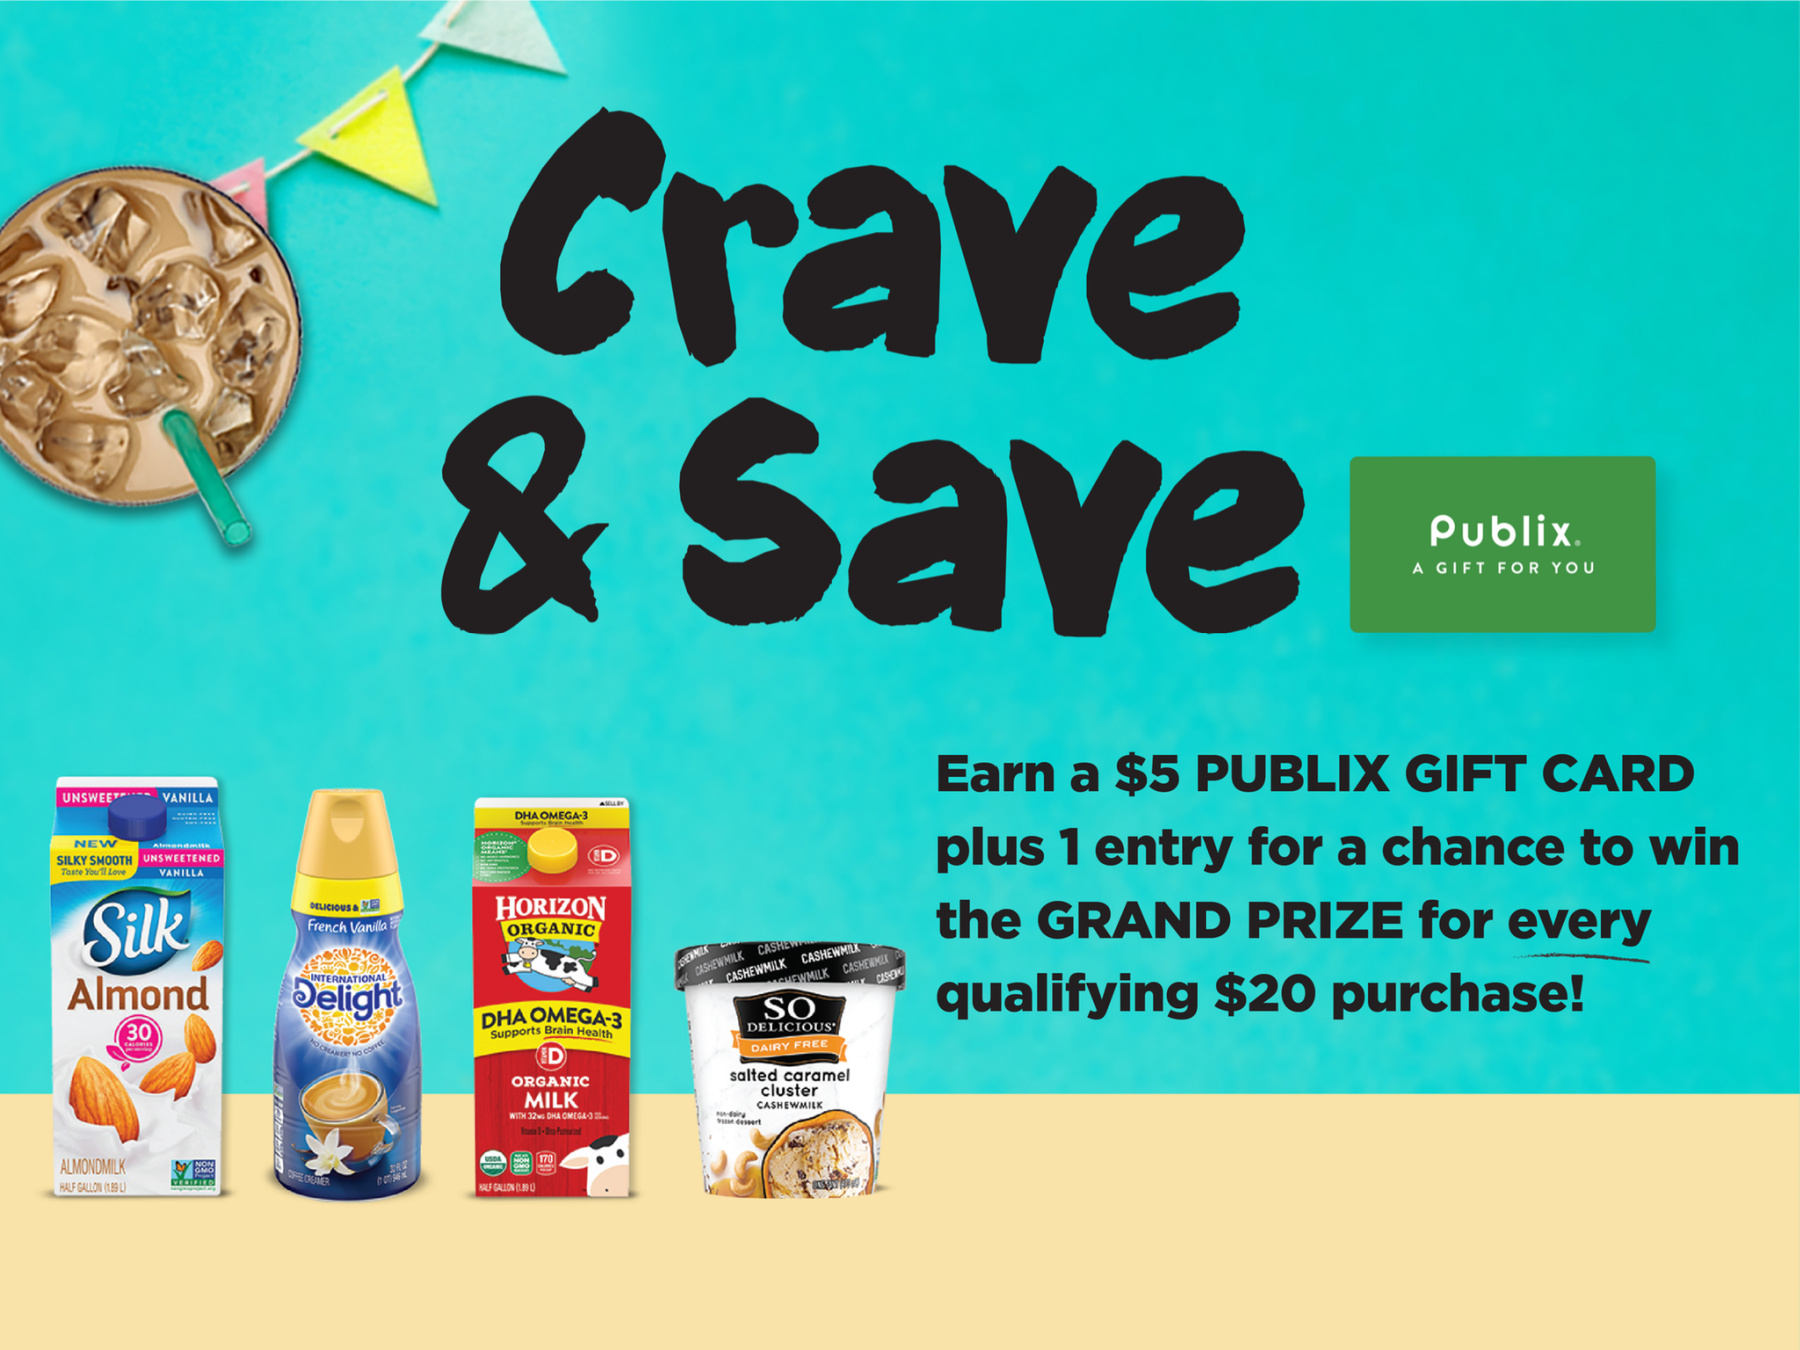 Keep Earning Publix Gift Cards With The Crave & Save Program on I Heart Publix